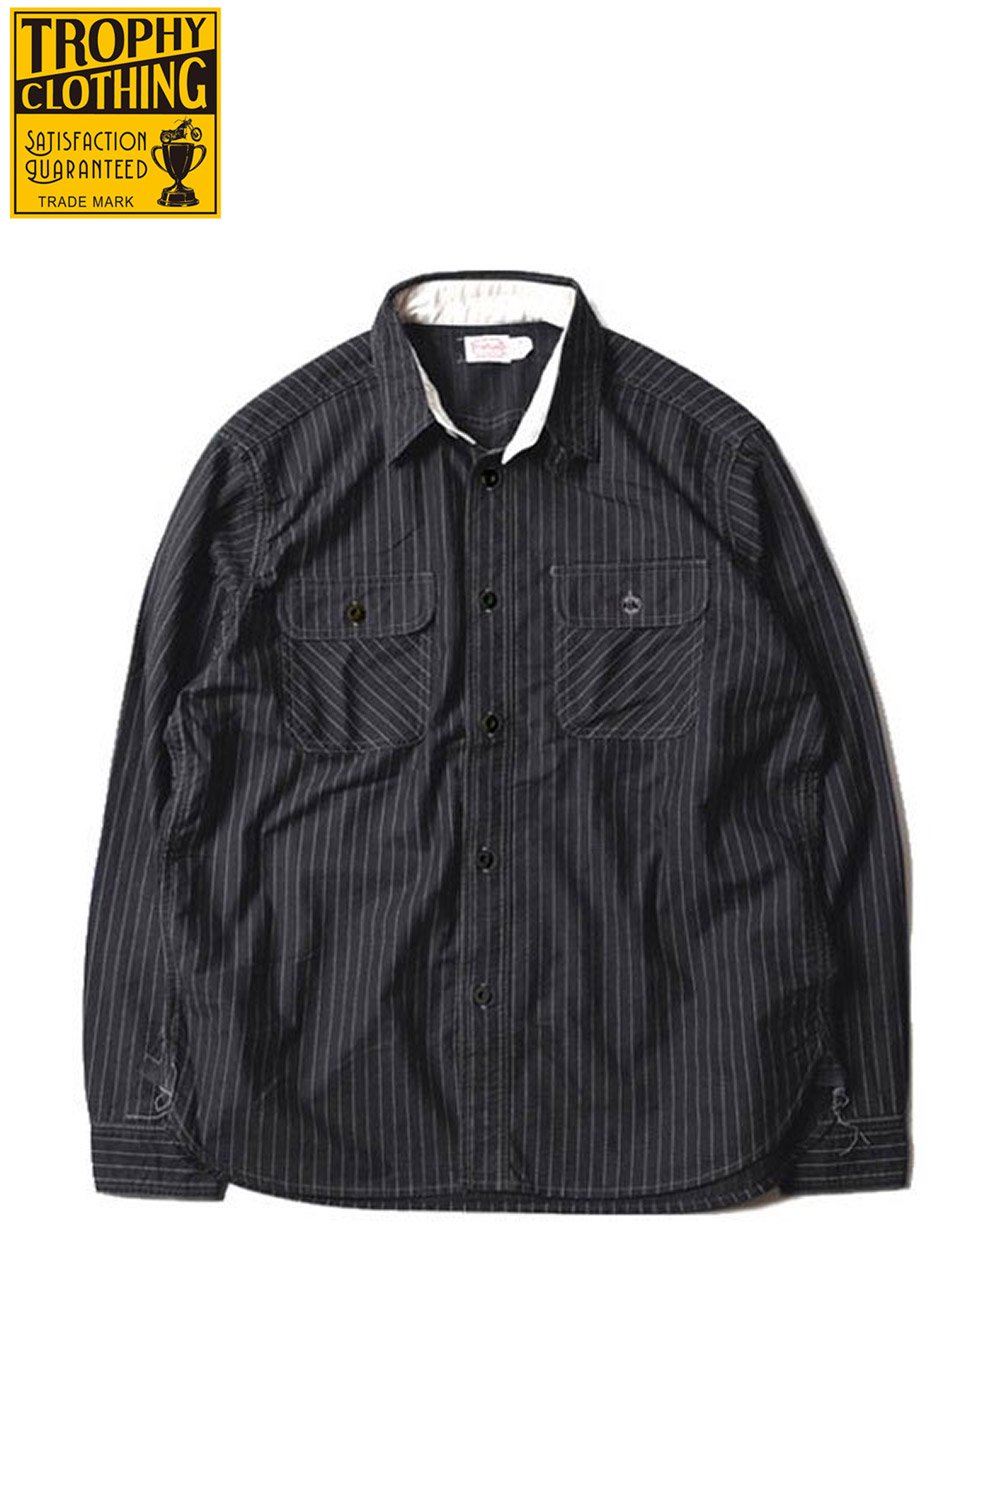 TROPHY CLOTHING(トロフィークロージング) デラックスシャツ DELUXE WABASH SHIRT TR21SS-401 通販正規取扱  | ハーレムストア公式通販サイト